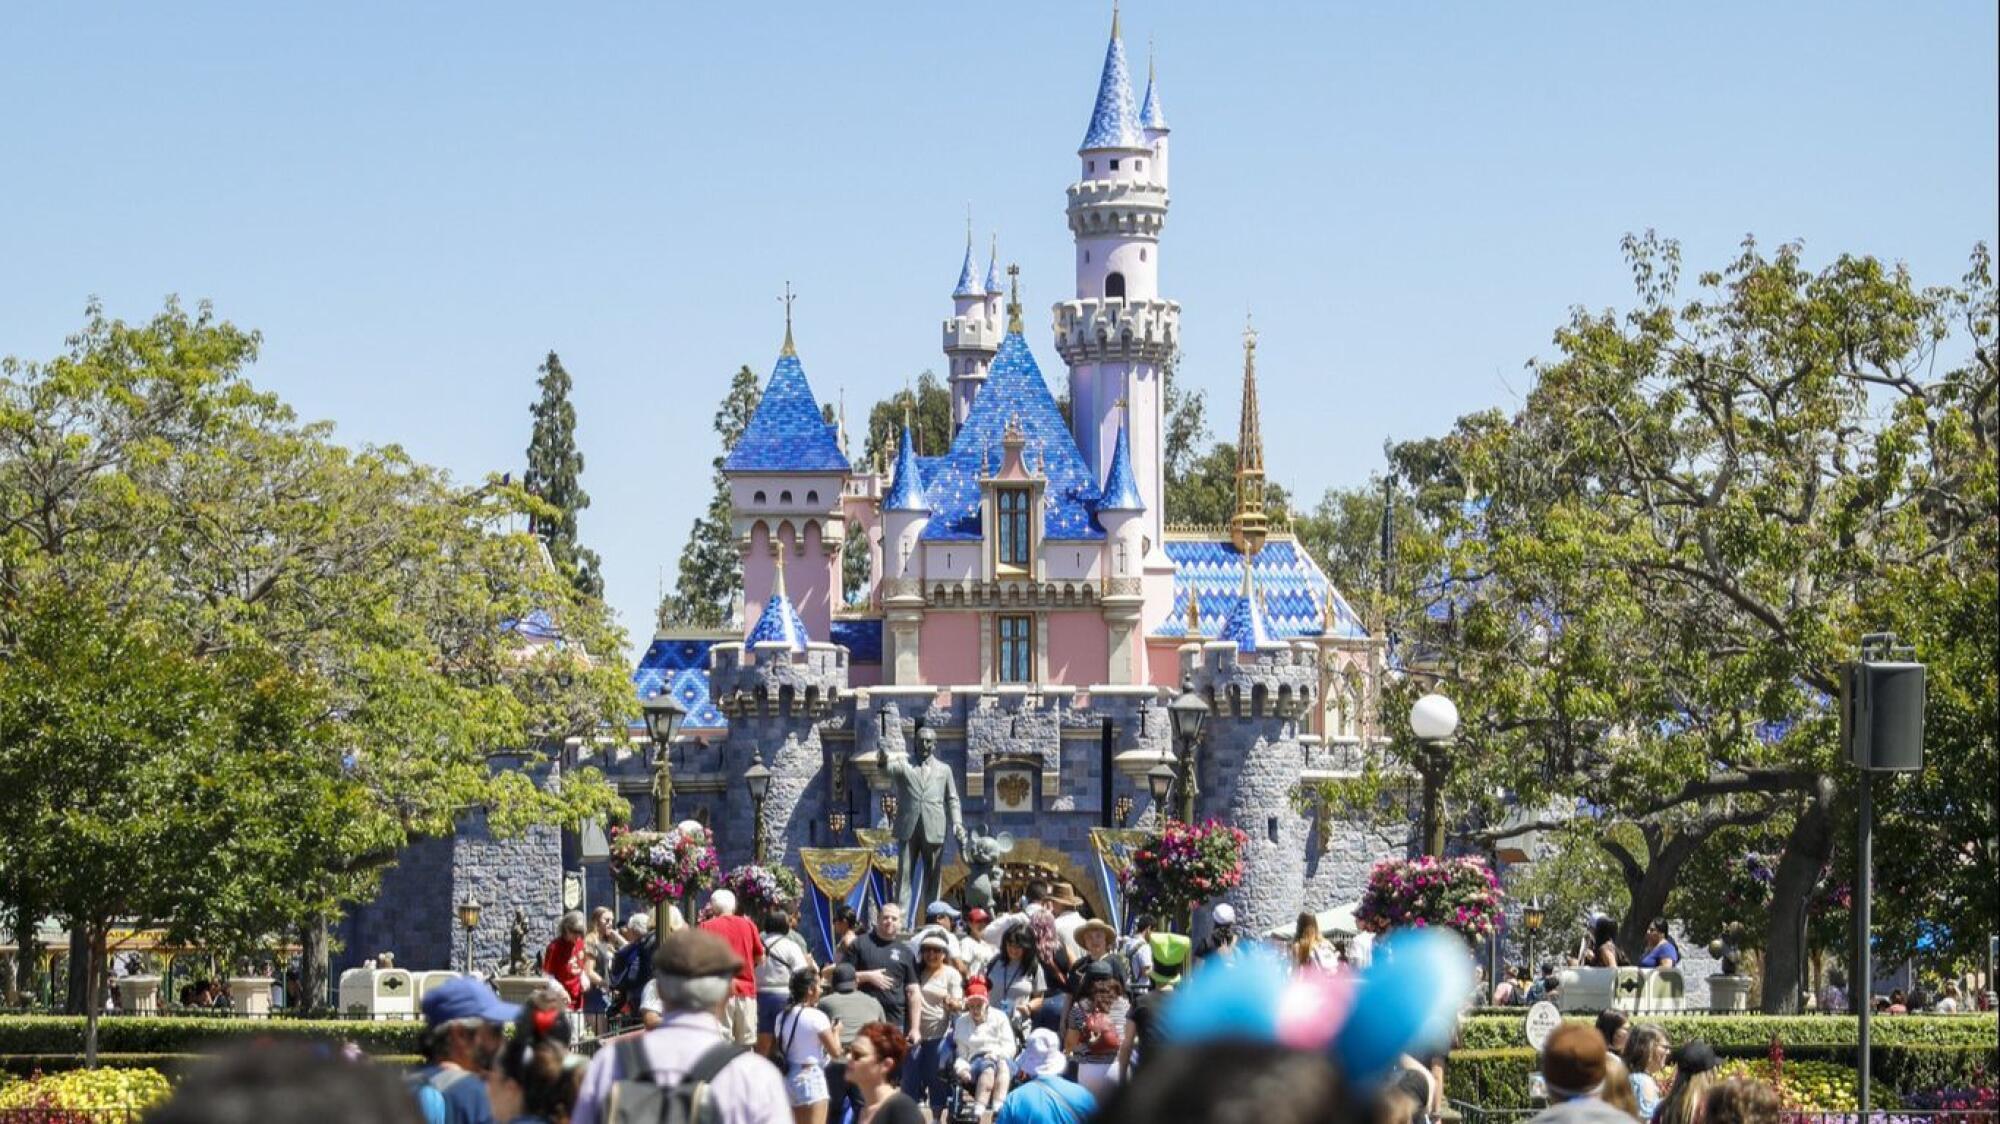 Sleeping Beauty Castle last year received a brighter, more animated look.